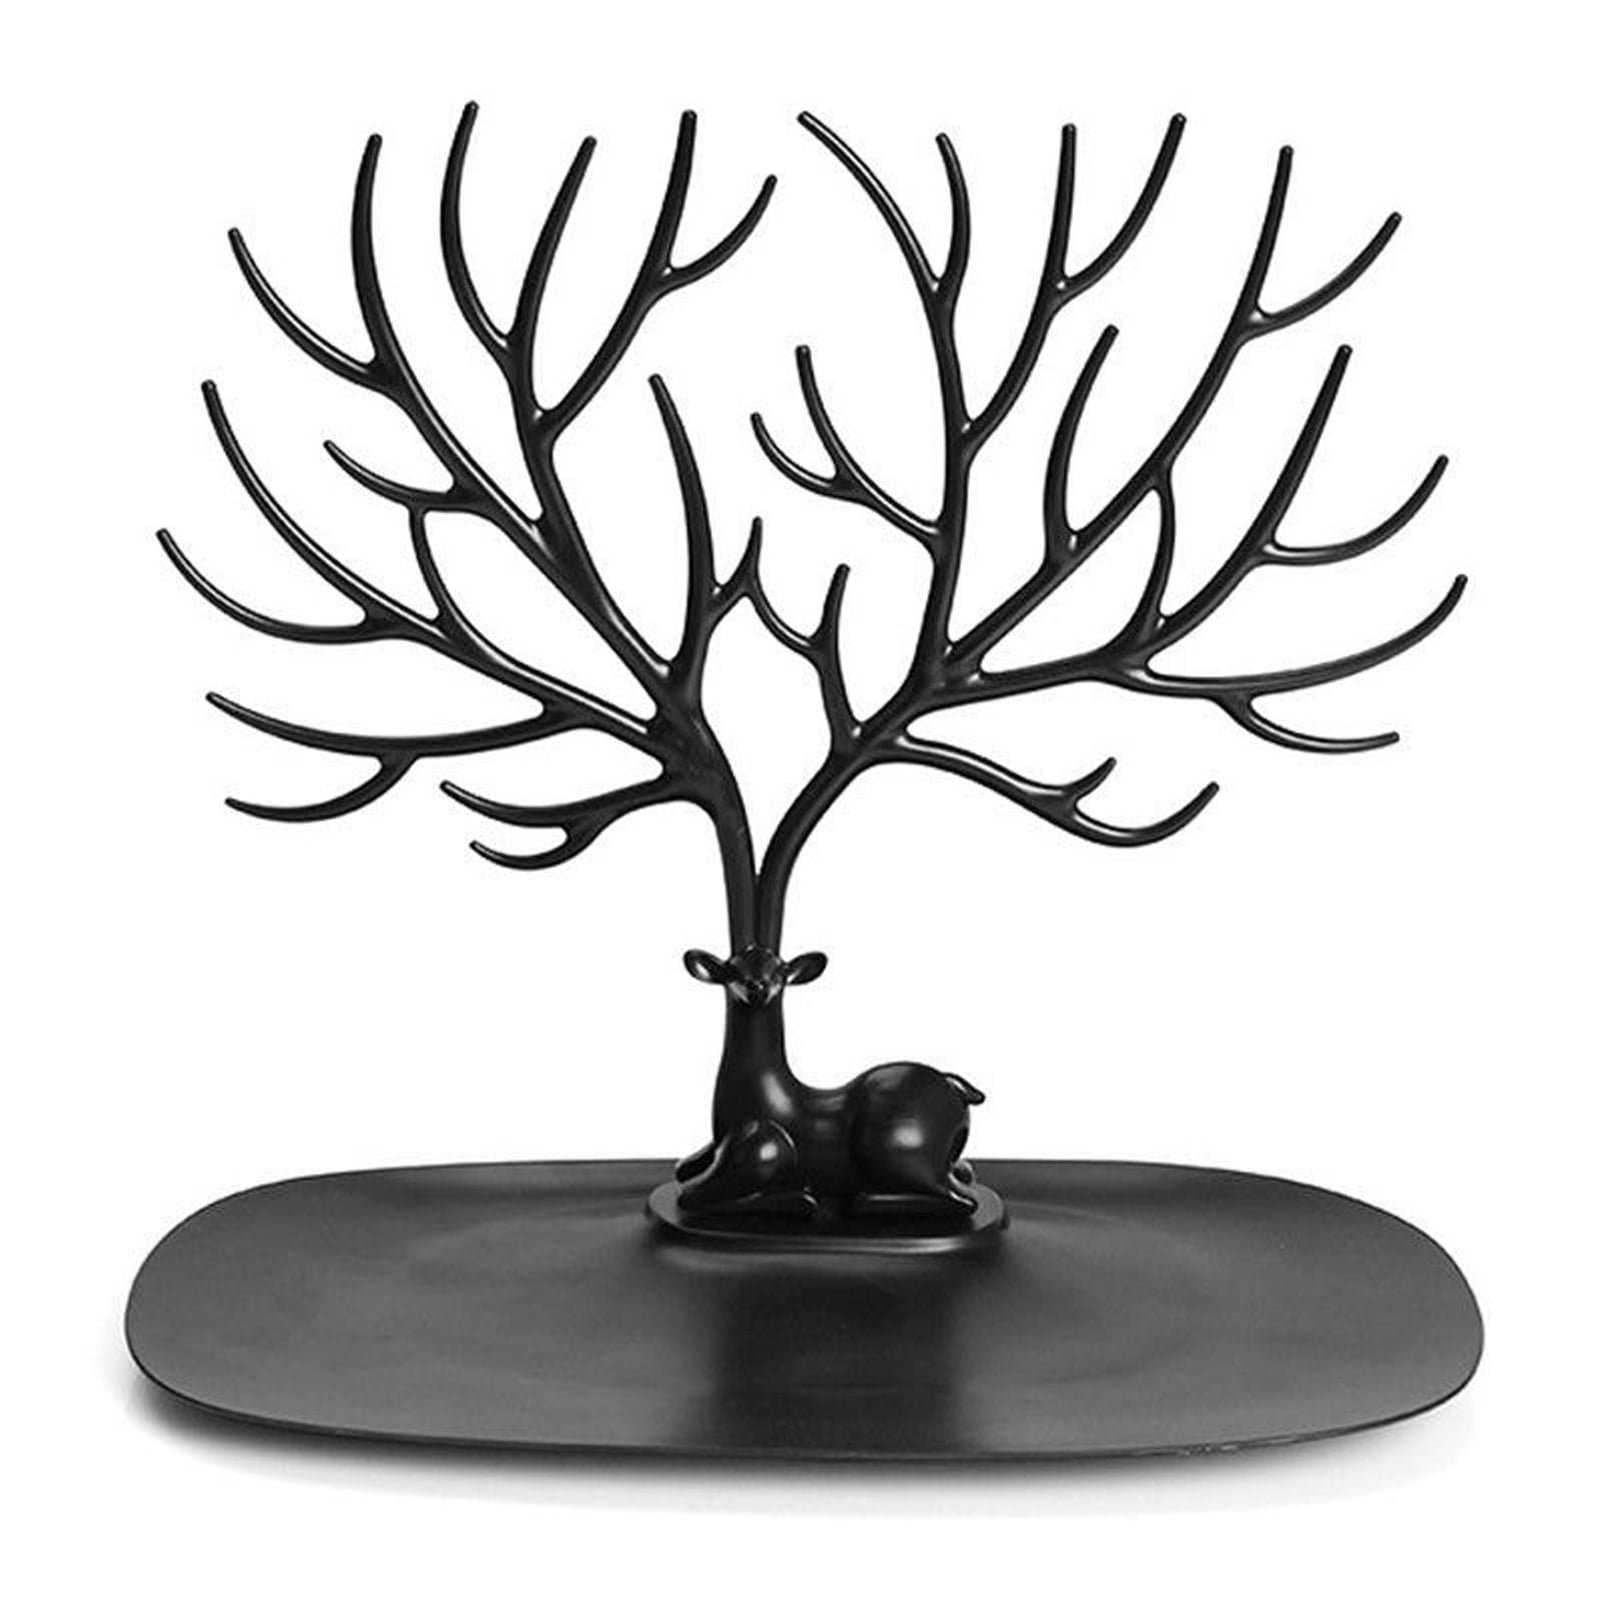 Large Jewellery Tree Stand Display Organizer Earring Necklace Show Rack Holder 